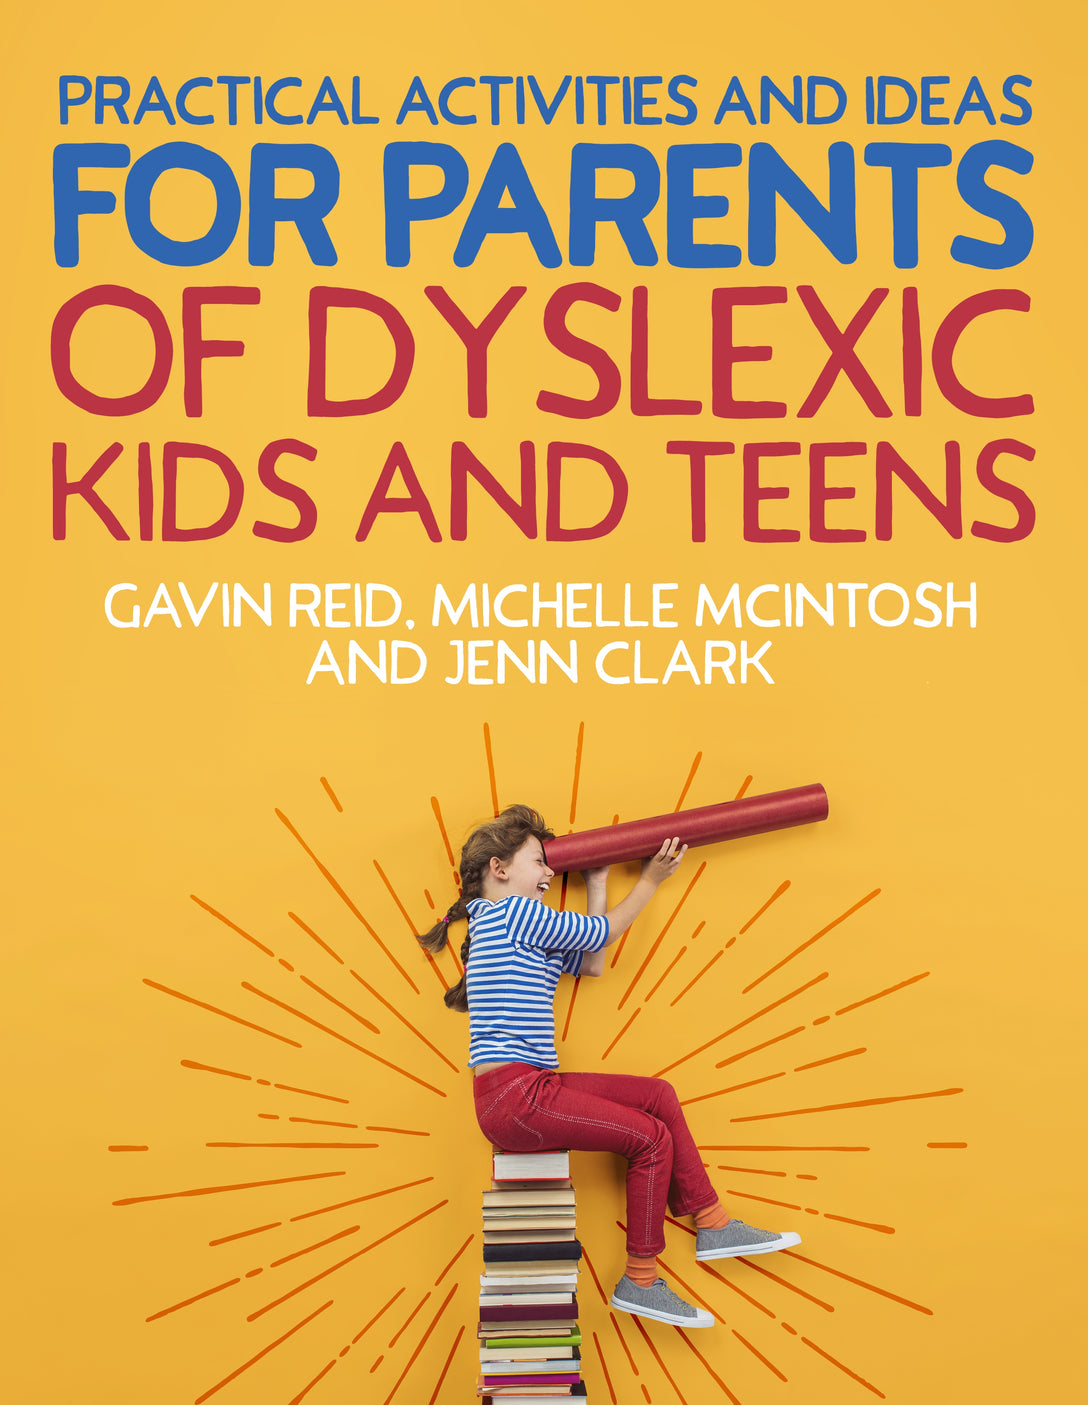 Practical Activities and Ideas for Parents of Dyslexic Kids and Teens by Gavin Reid, Michelle McIntosh, Jenn Clark